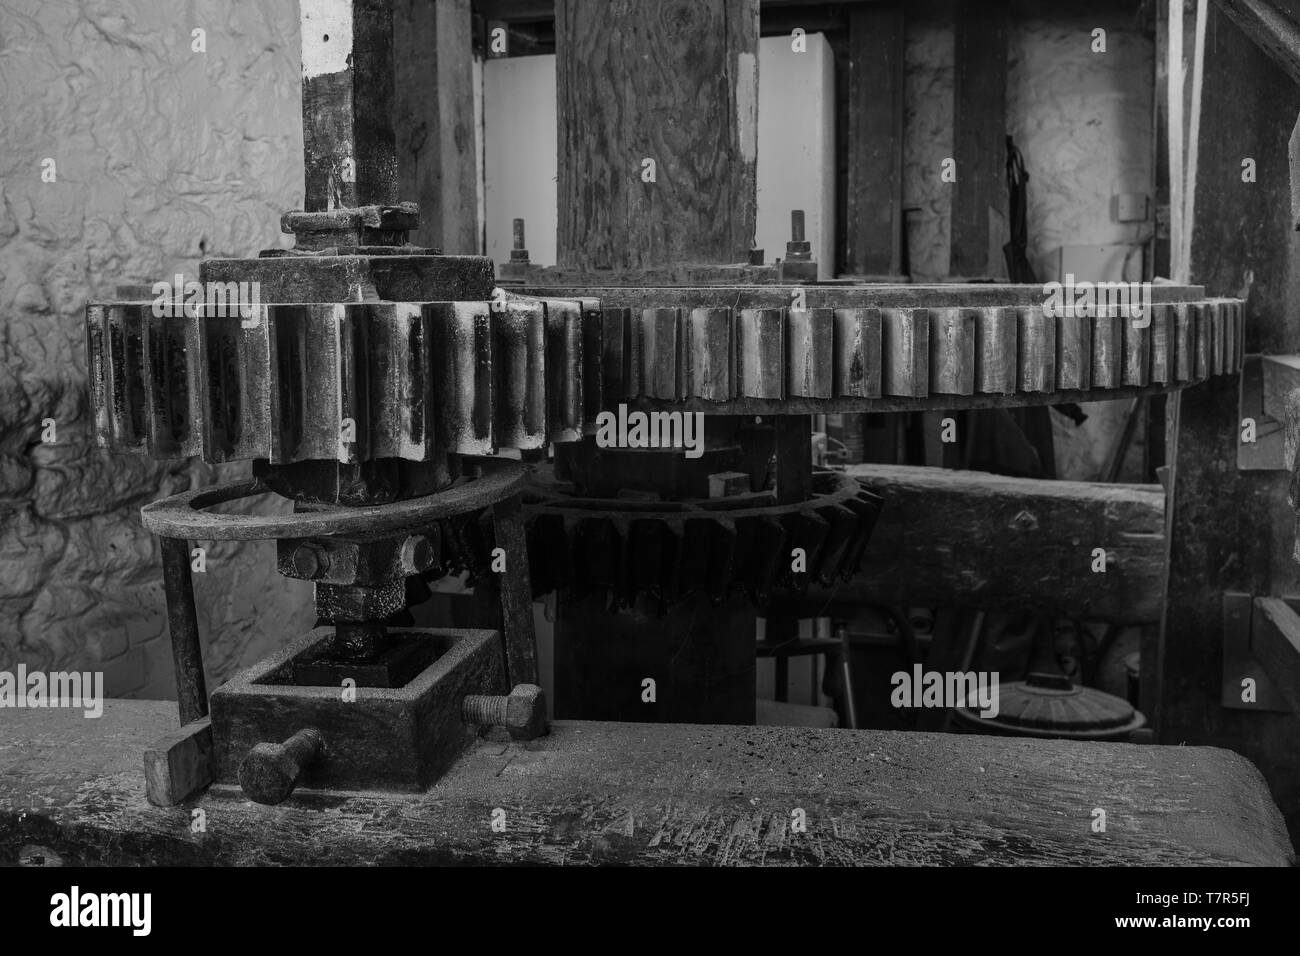 A black and white image of the cogs and machinery inside a watermill in Devon, England, taken from the right of the cogs Stock Photo